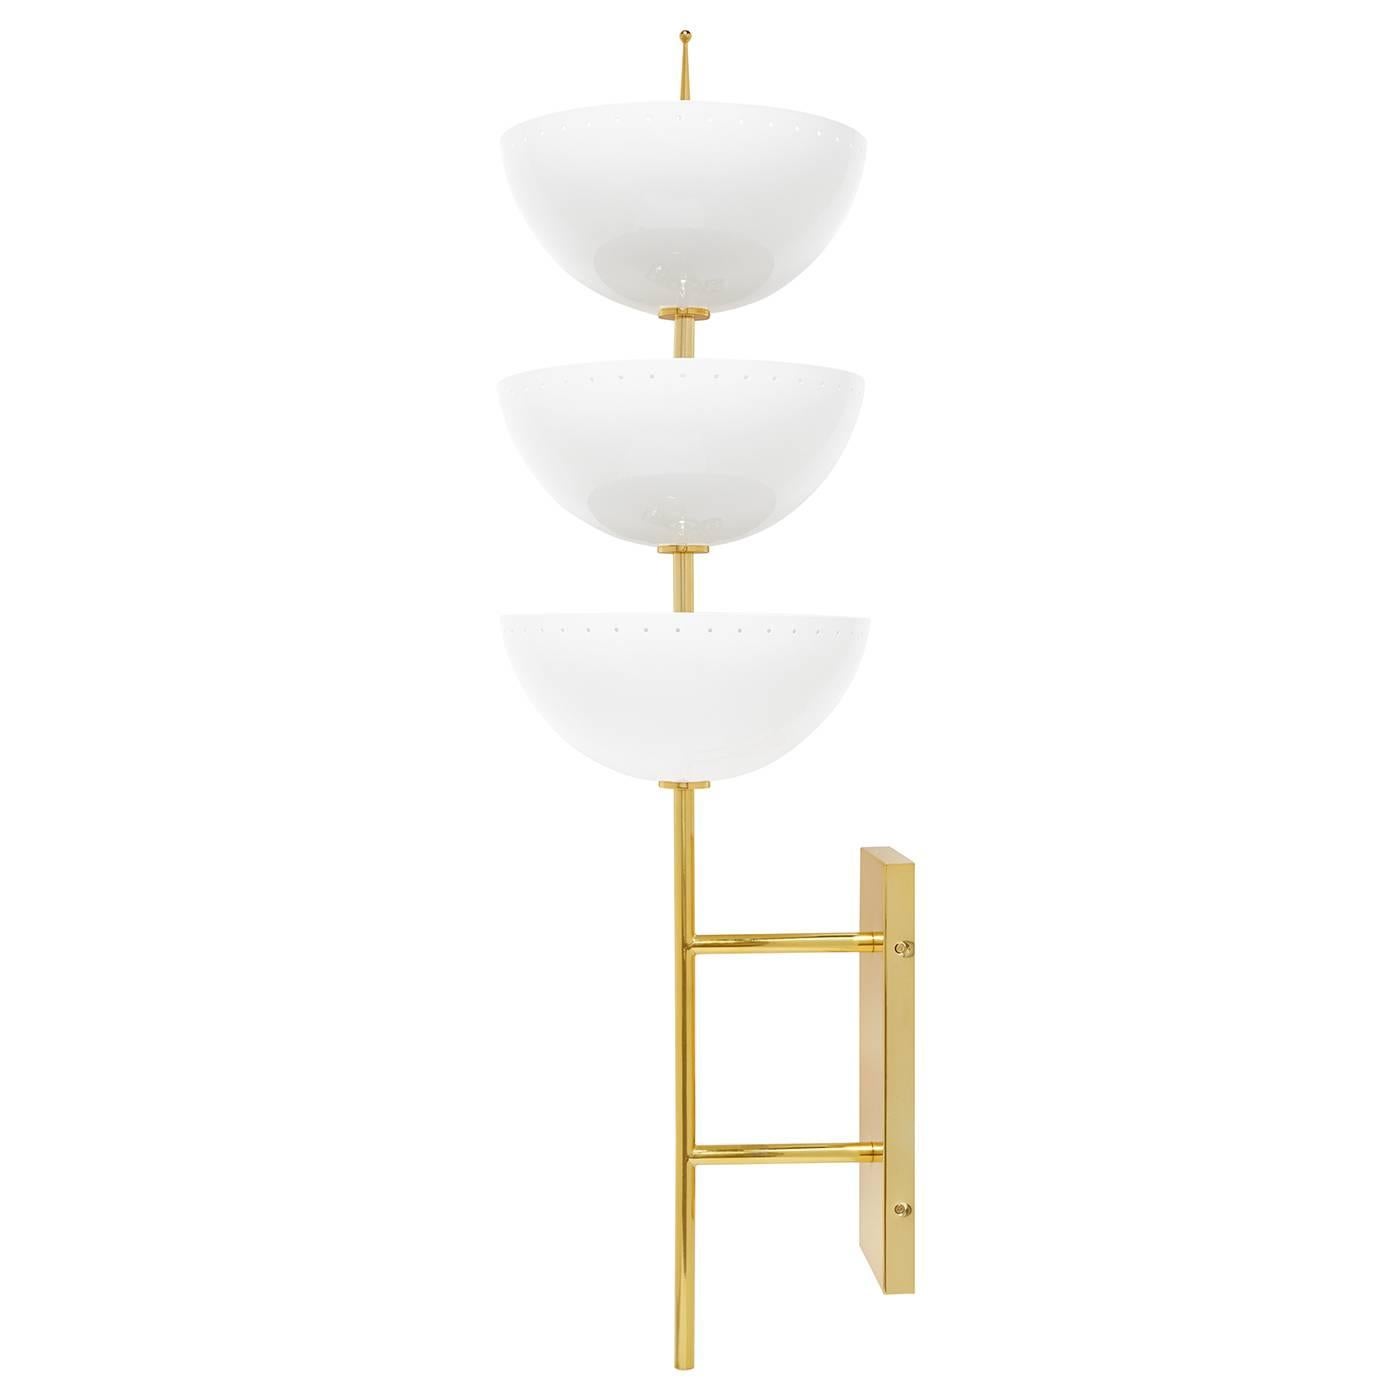 Magic mood. Large and in charge, our Lisbon sconce is a glamorous gesture that's just as elegant in a studio apartment as it is in an Italian palazzo. A polished brass stem supports three half spheres of ivory enameled metal with subtle round